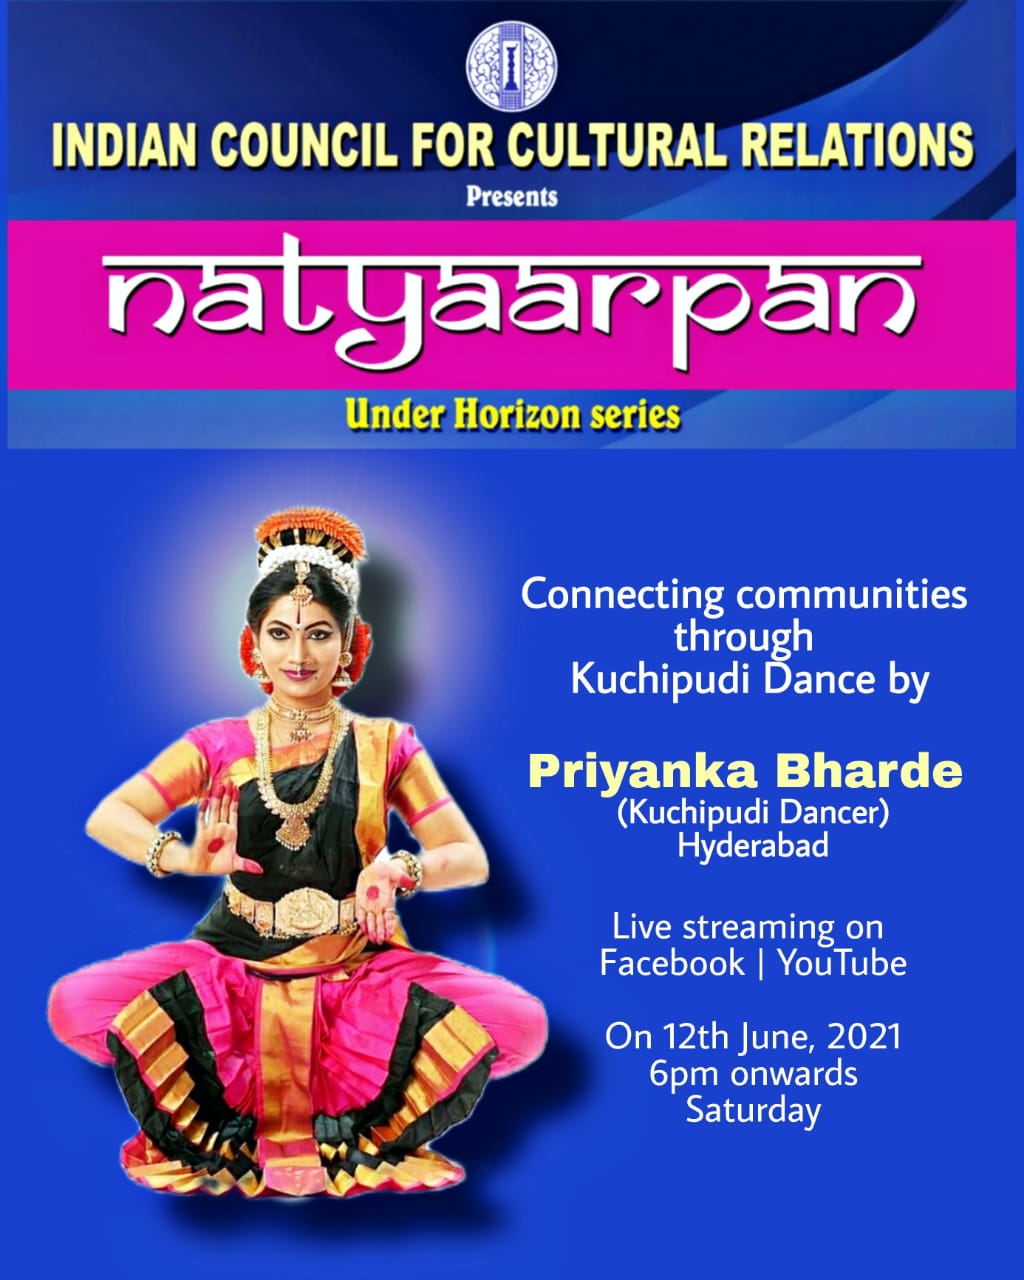  NATYAARPAN - A virtual Kuchipudi Dance performance on Saturday 12th June, 2021 at 6.00 PM by ICCR Hyderabad live on Facebook & YouTube